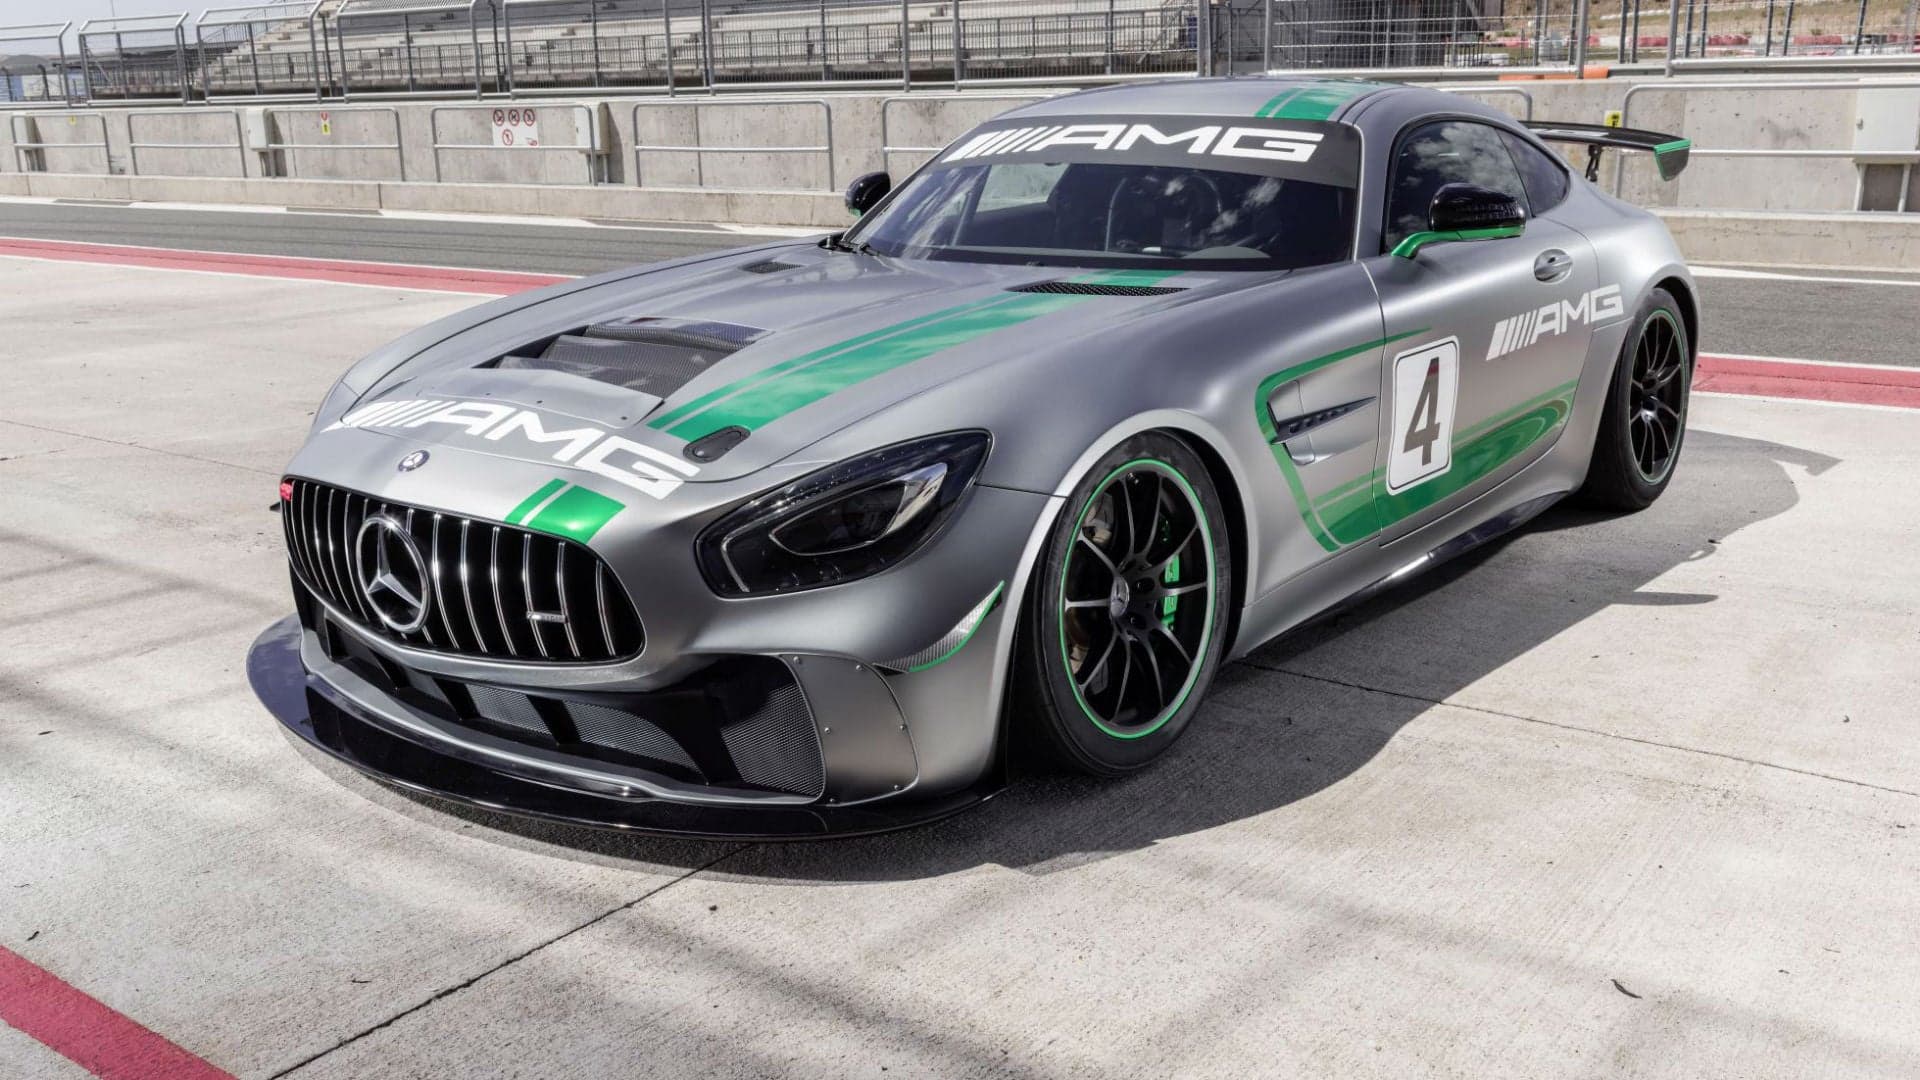 Mercedes-AMG’s Race Scout App Aims to Connect Drivers With Teams